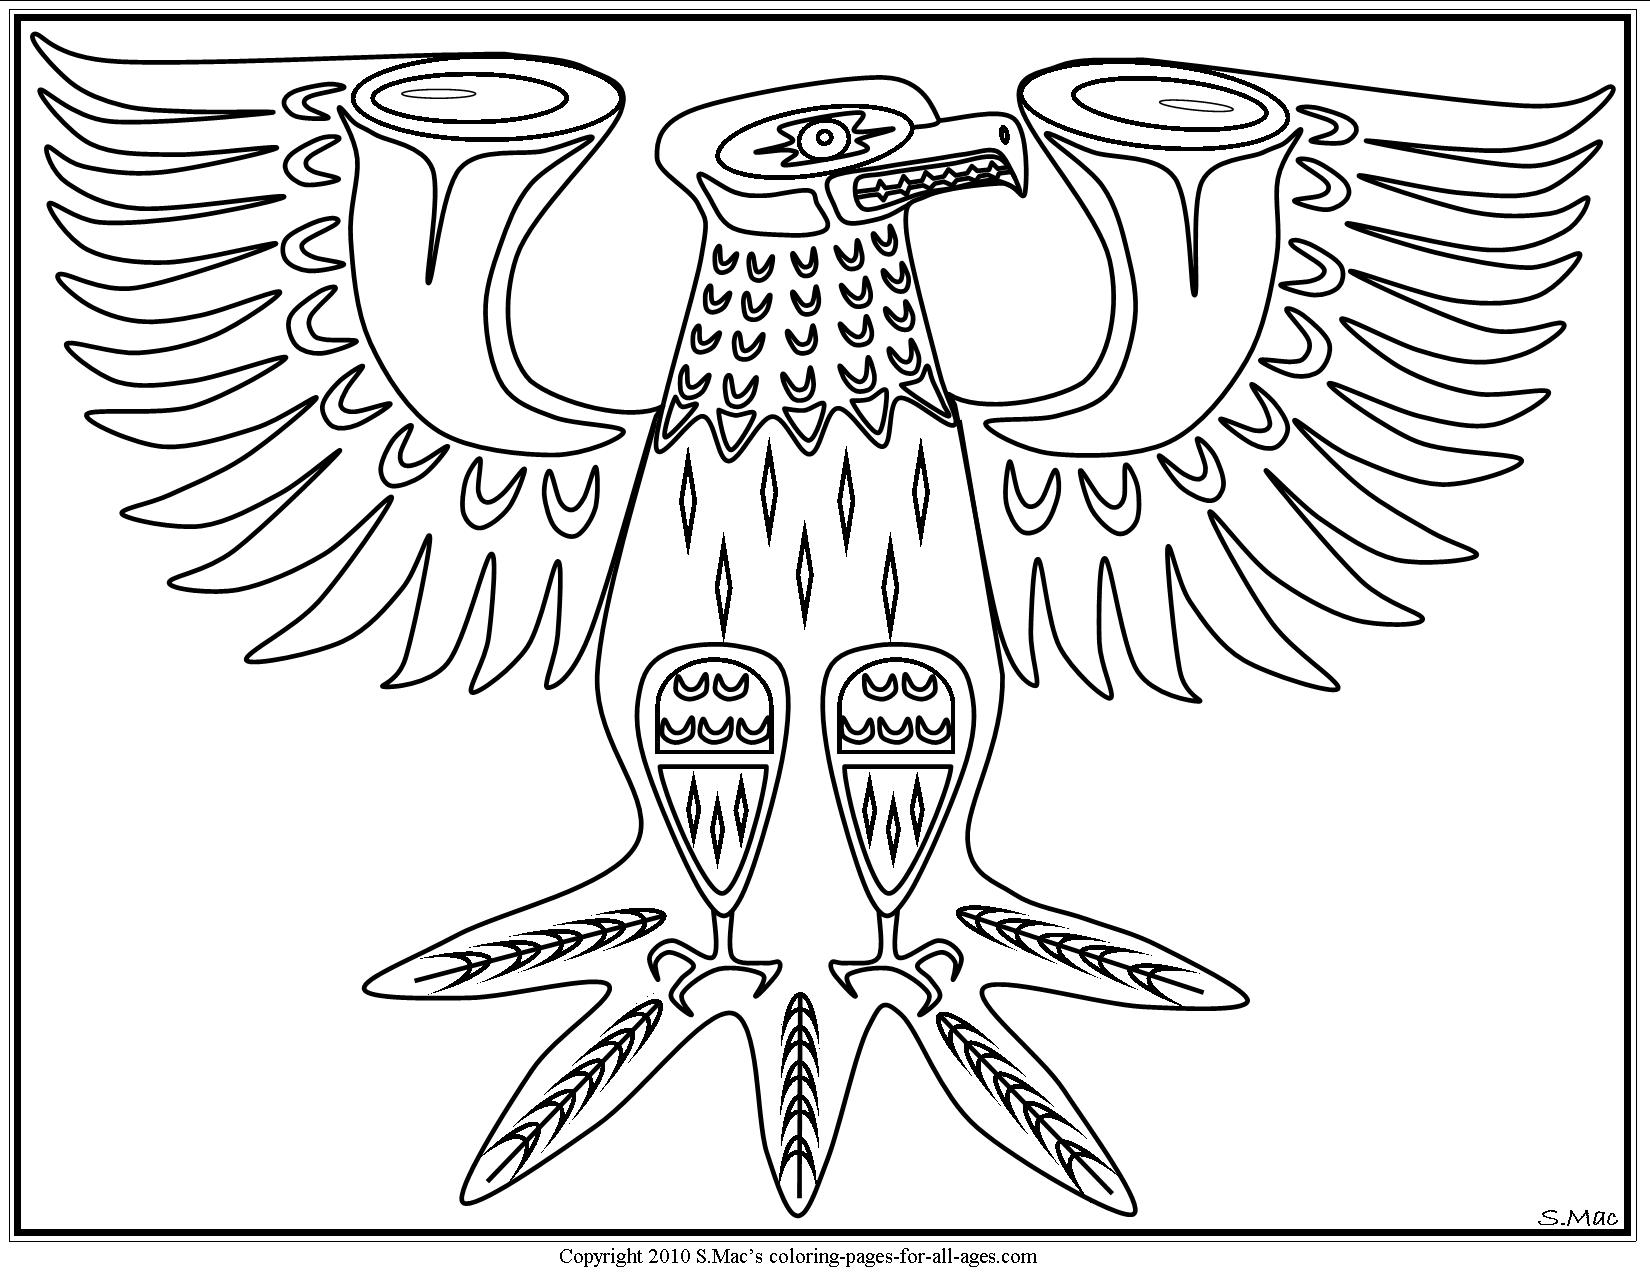 Northwest Native American Coloring Pages - Get Coloring Pages